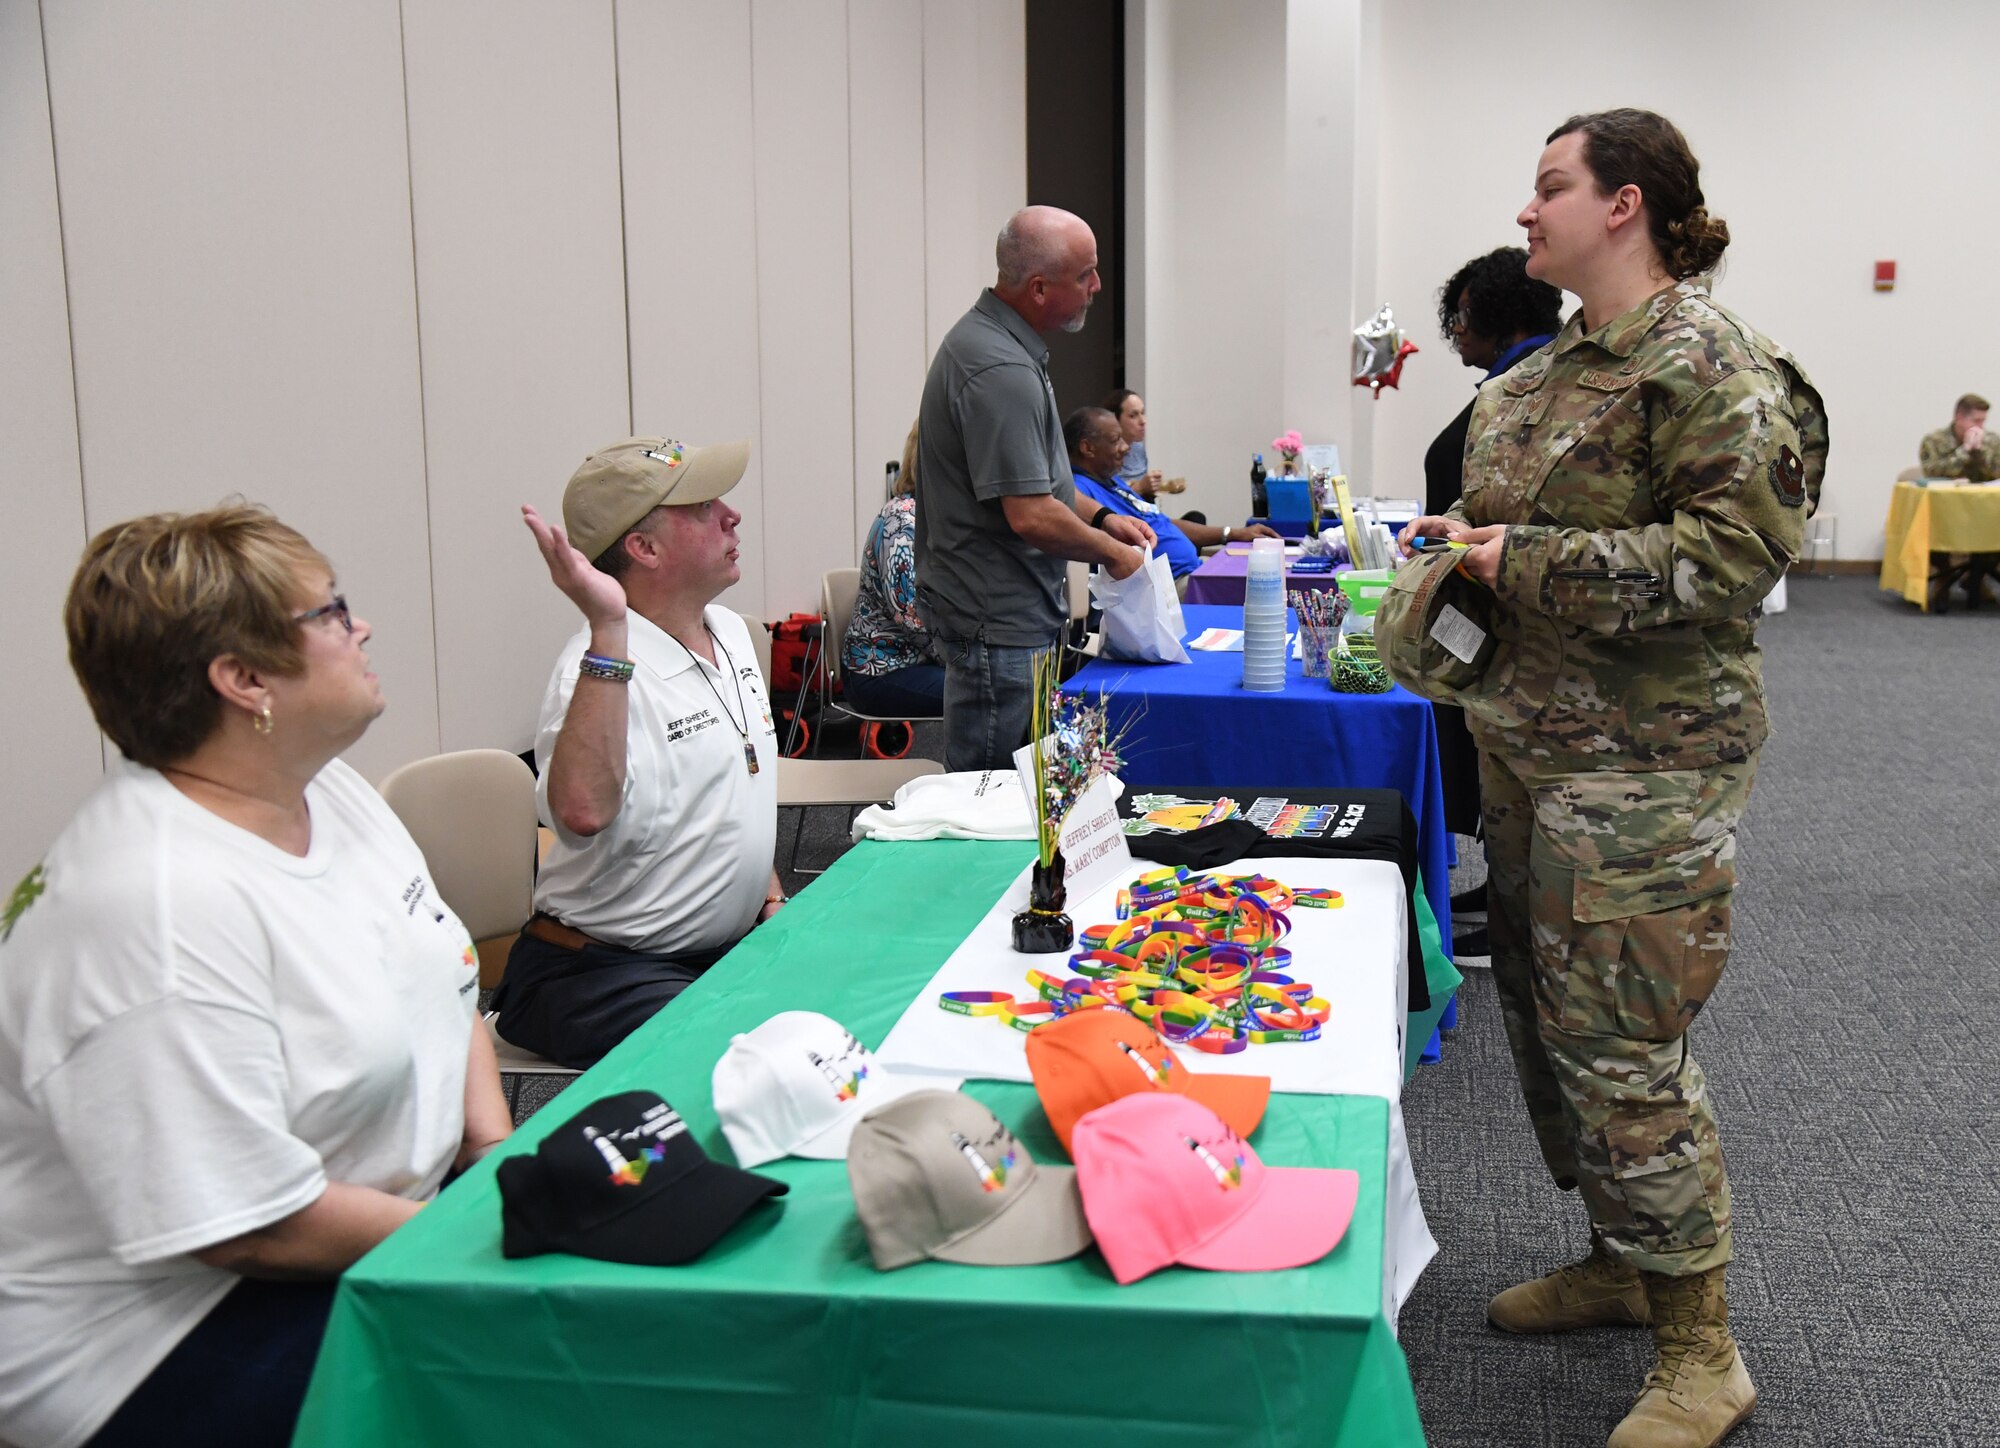 Keesler personnel attend the LGBTQ+ Informational Expo inside the Roberts Consolidated Aircraft Maintenance Facility at Keesler Air Force Base, Mississippi, June 25, 2021. Keesler celebrated Pride Month throughout June, with events such as a scavenger hunt, guest speaker and discussion panel. (U.S. Air Force photo by Kemberly Groue)